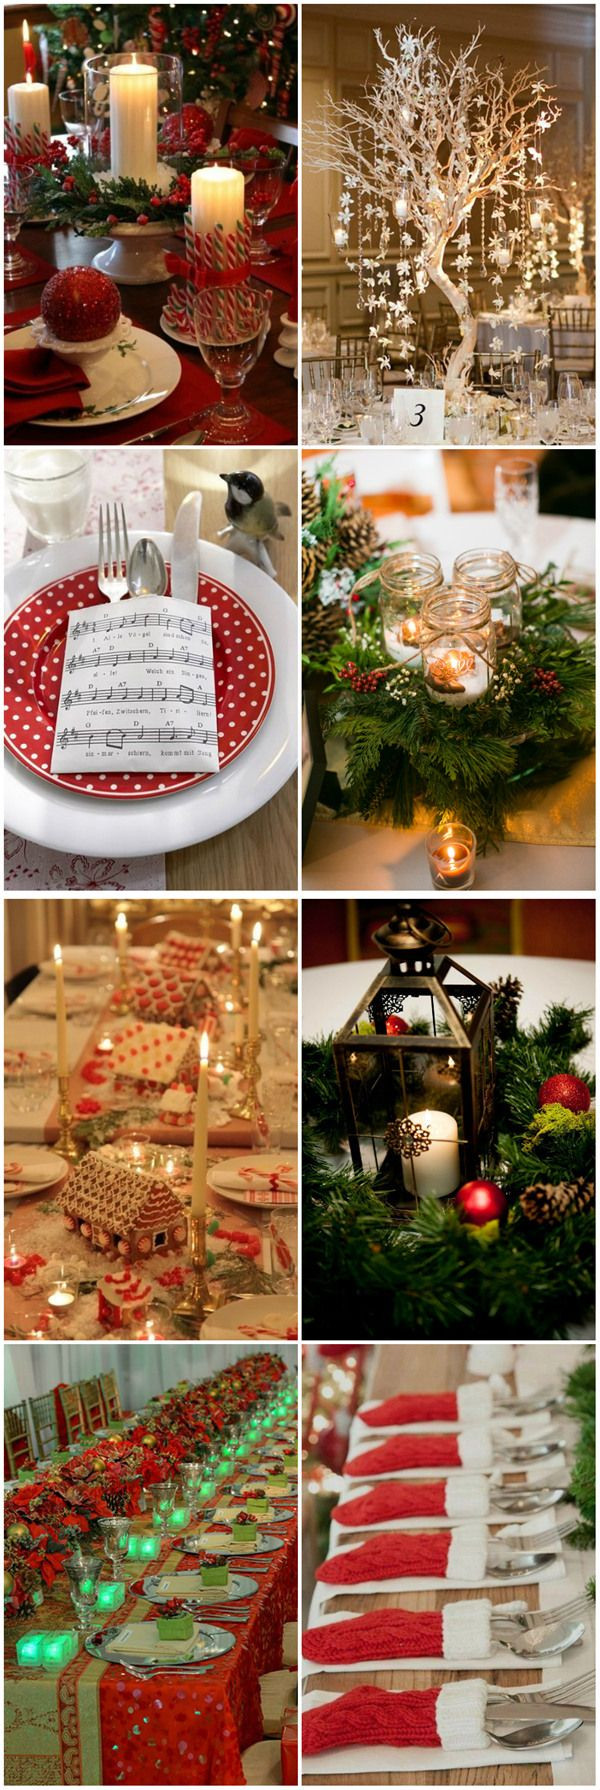 Christmas Engagement Party Ideas
 Top 25 Christmas wedding ideas of the year 2015